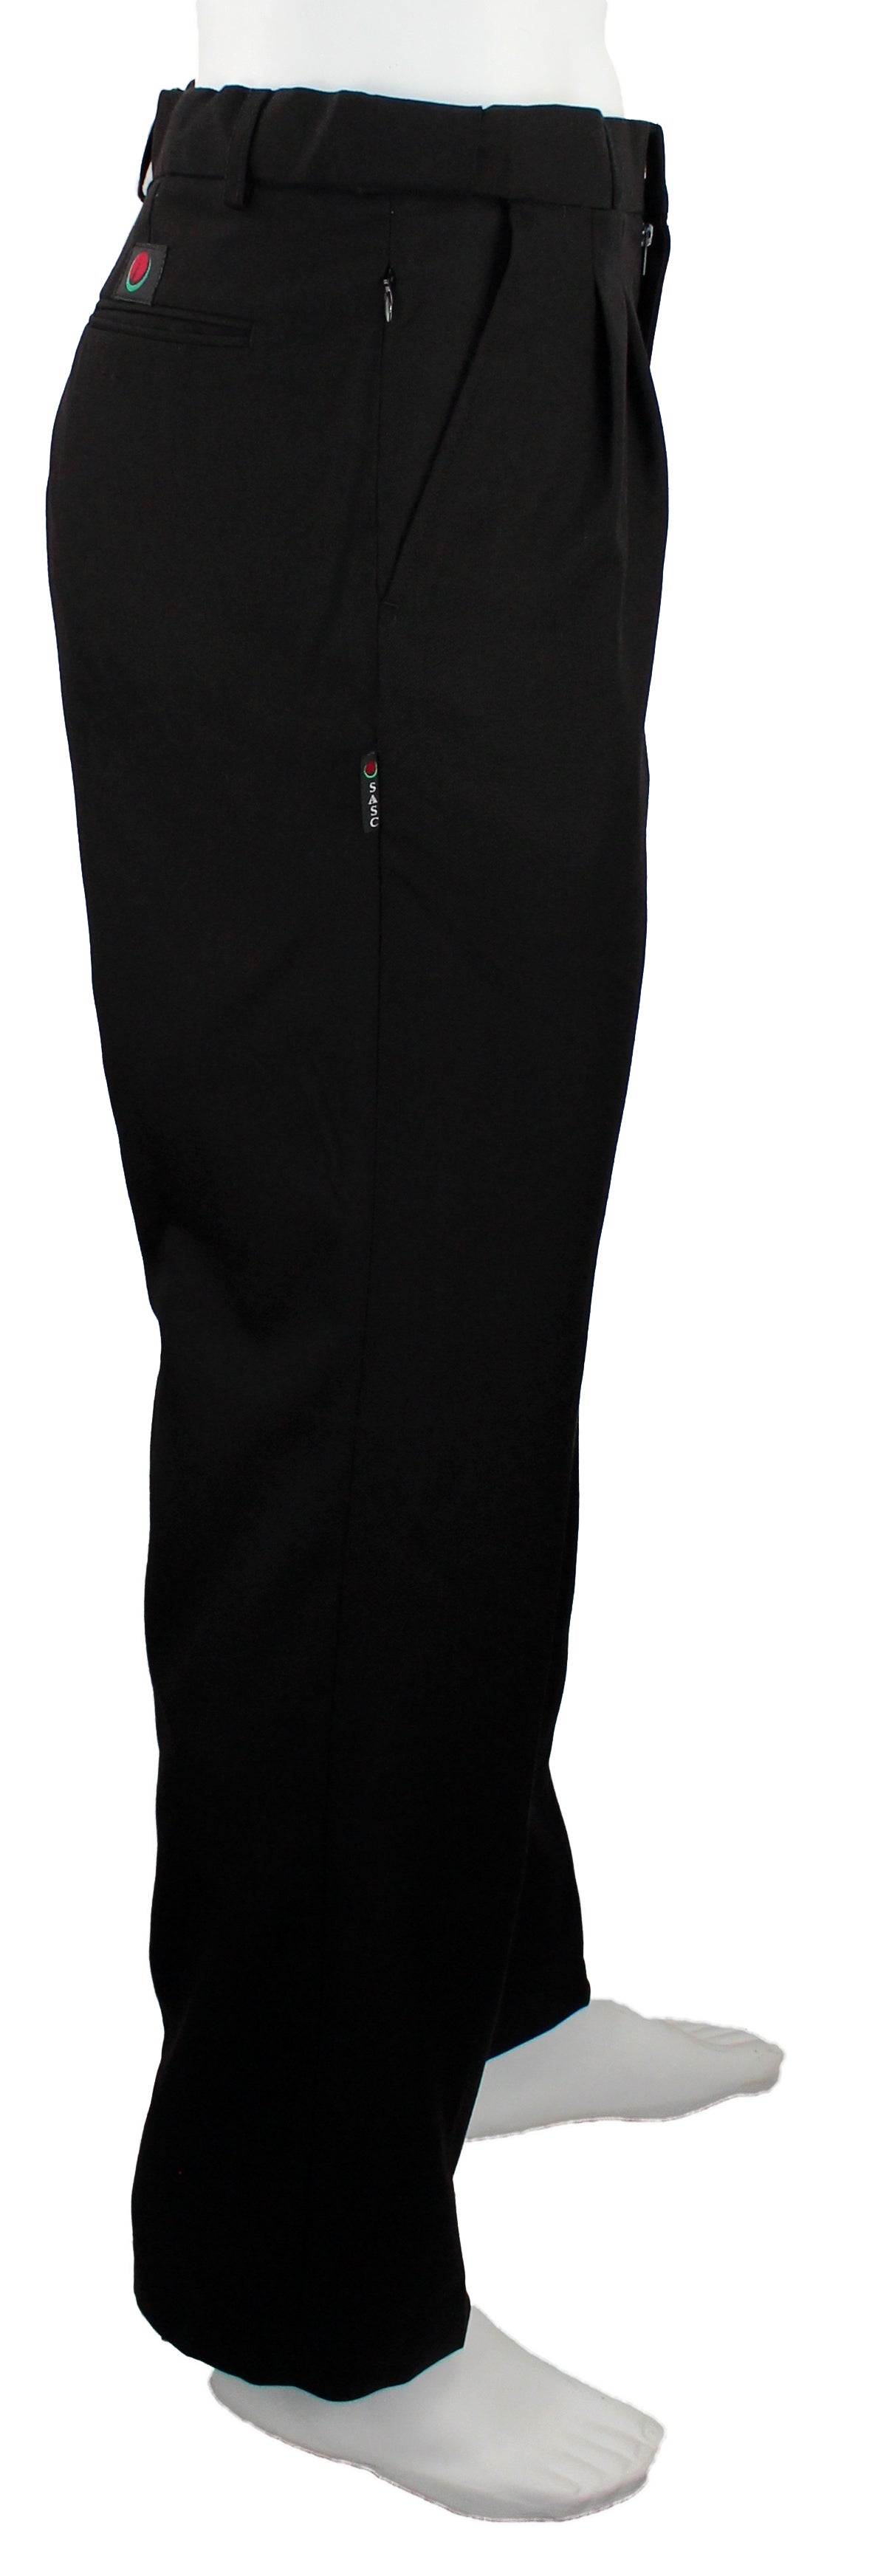 ST ALBANS COLLEGE MENS PLEATED PANT